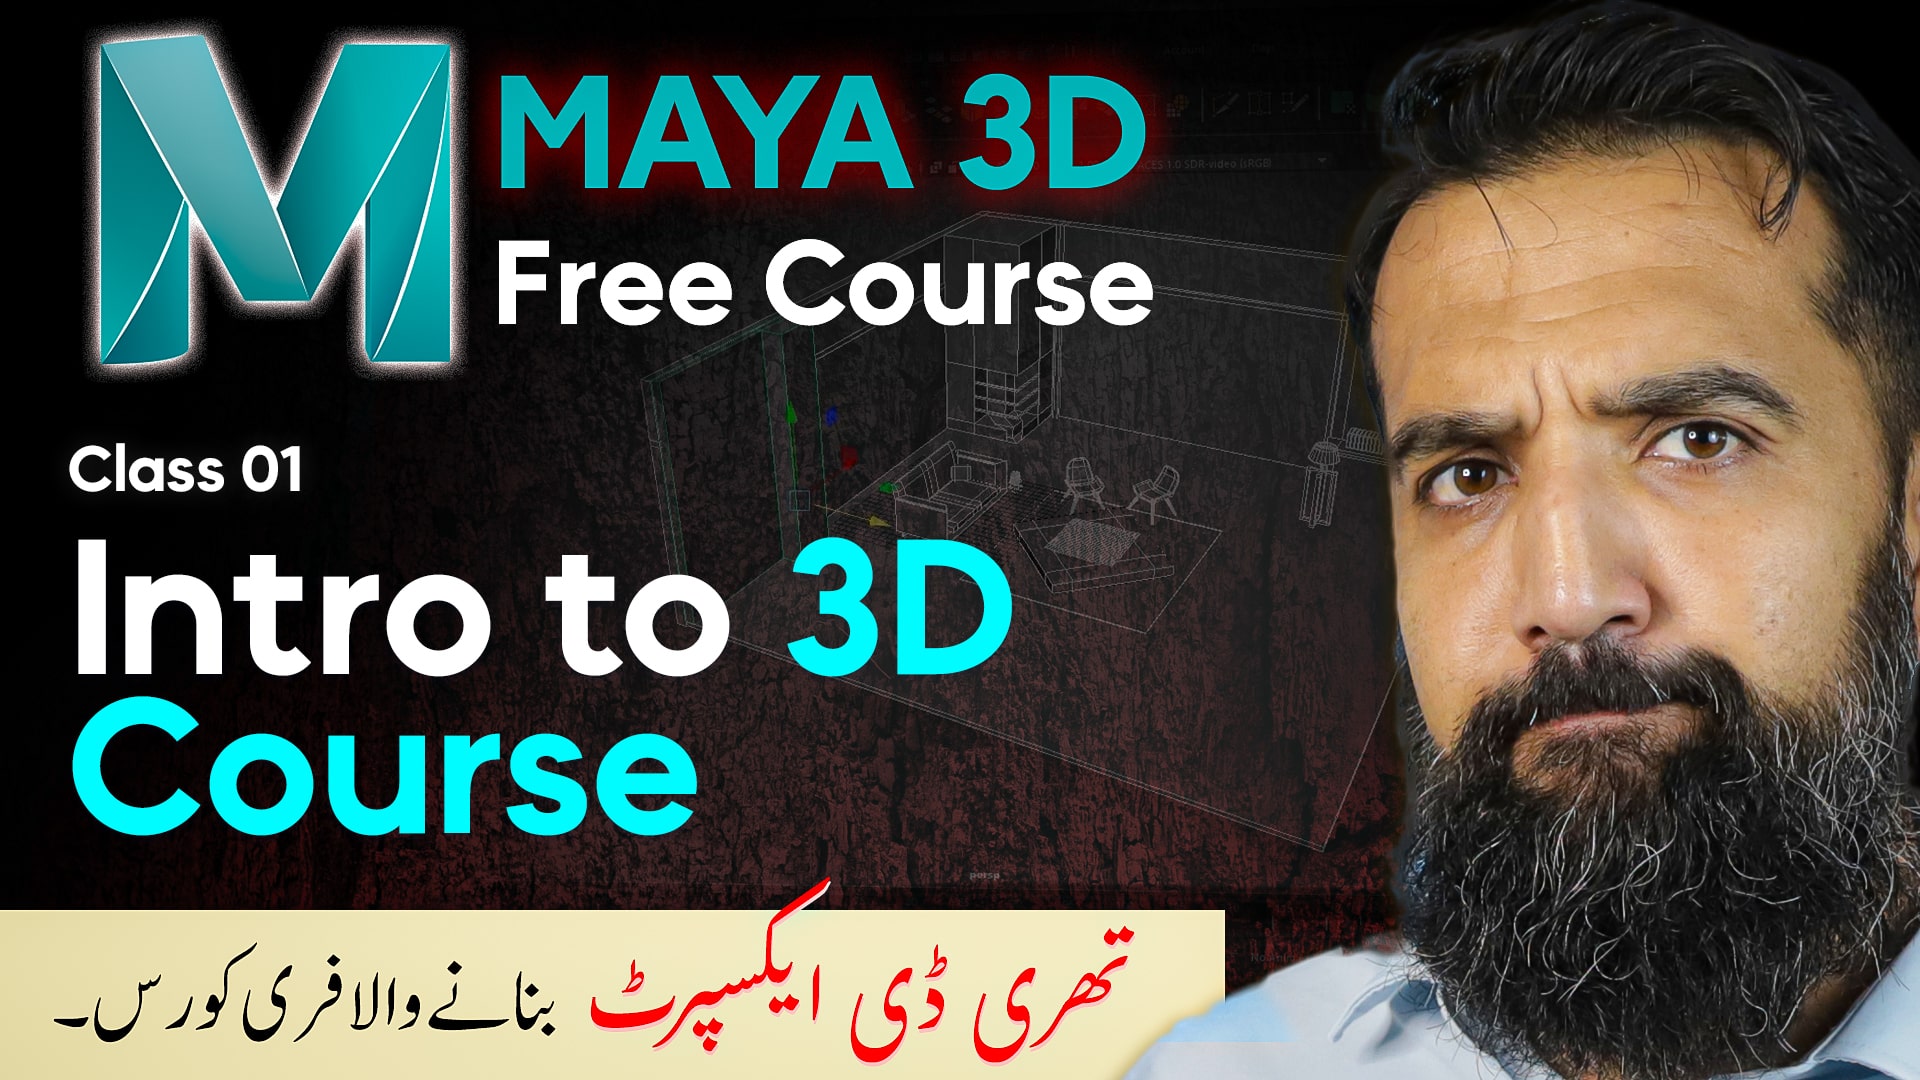  maya-3d-course-for-3d-desginers-by-azad-chaiwala-64f85a57294a1414842006.jpg 